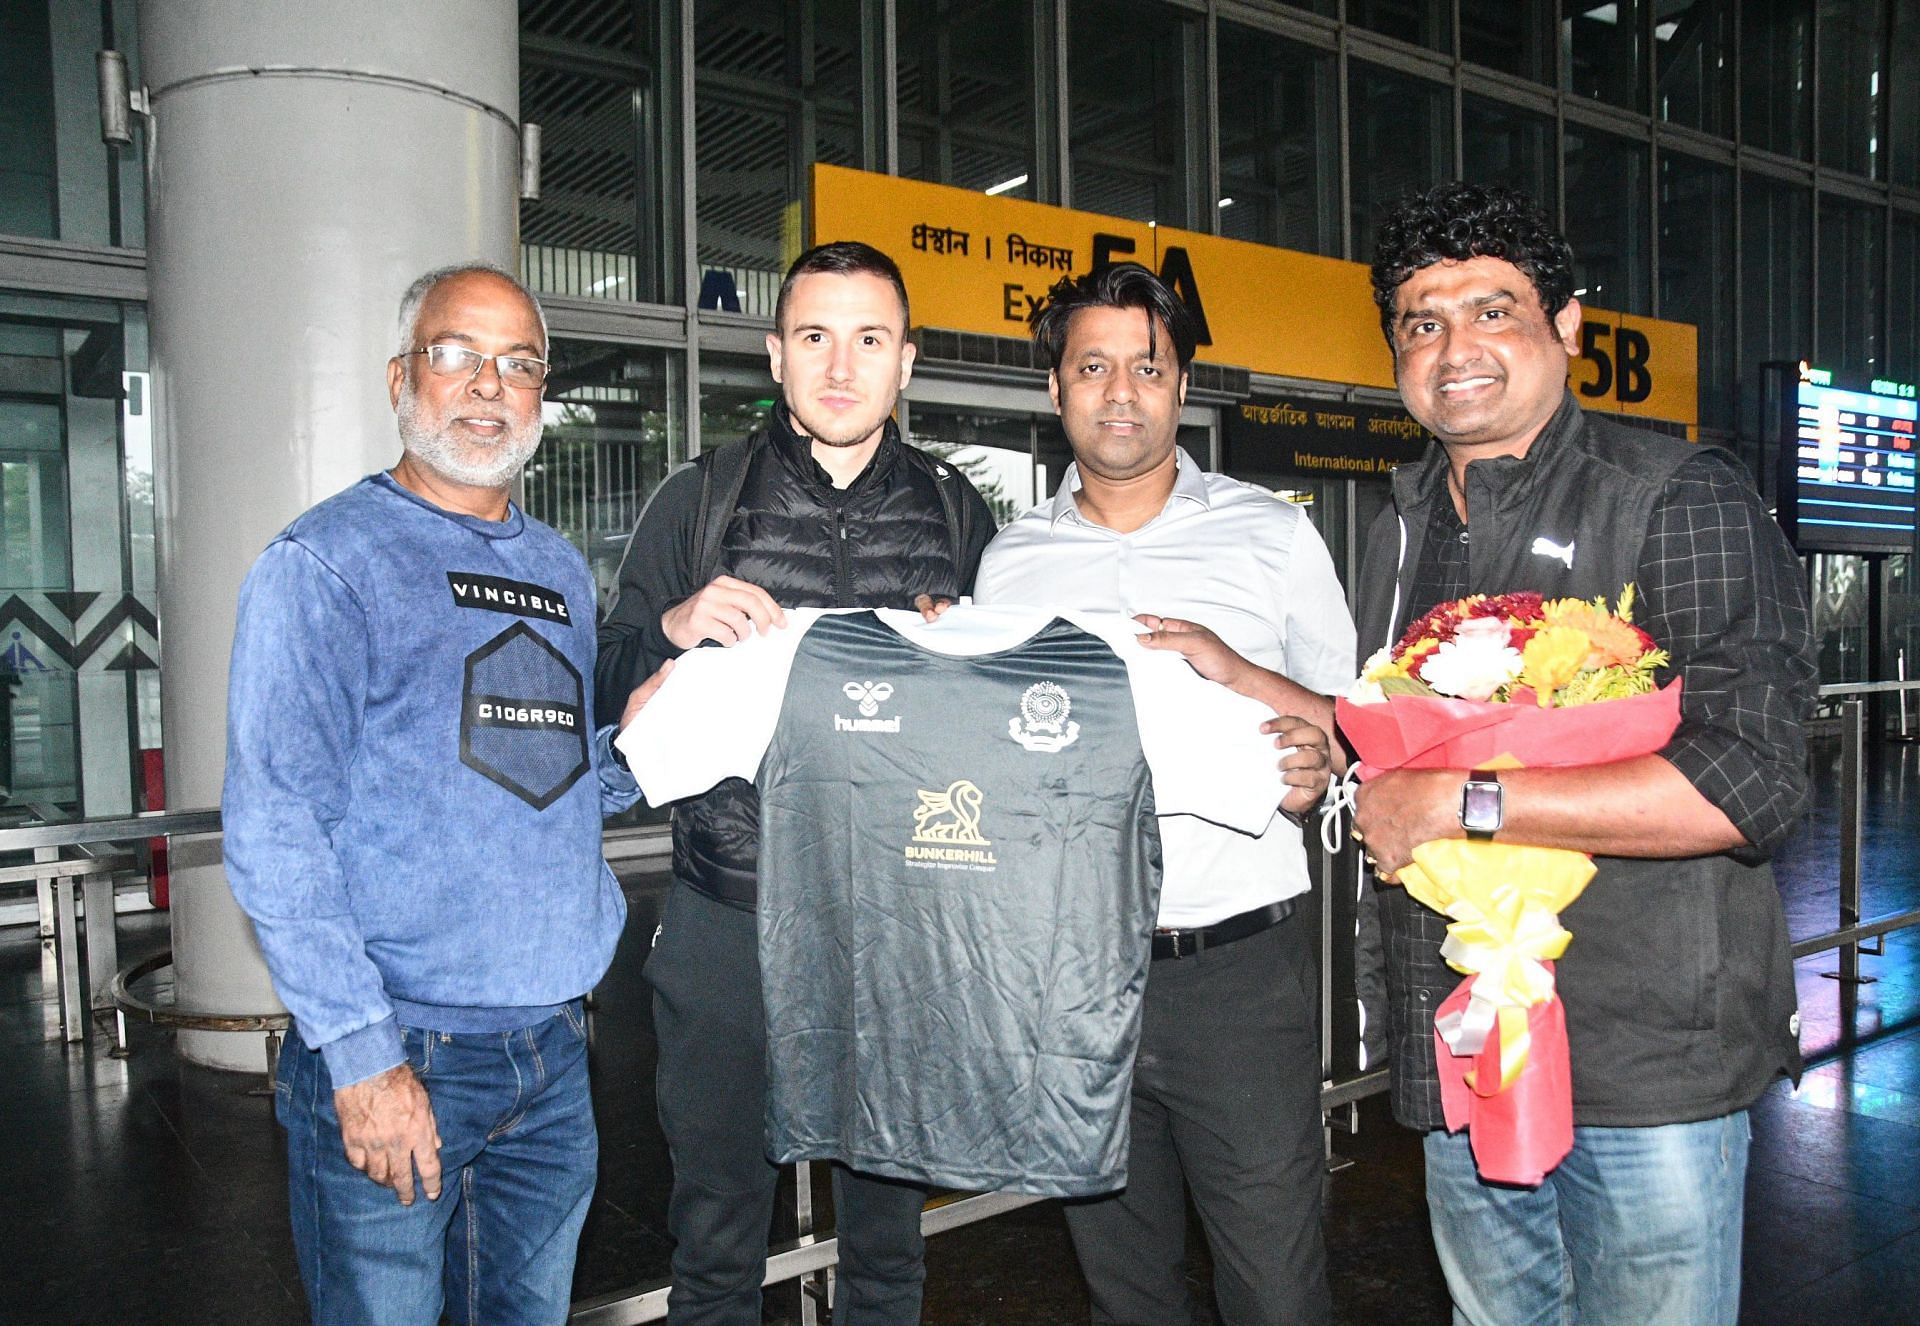 From left to right: Belal Khan, Anđelo Rudović, Danish Iqbal and Dipendu Biswas. (Image Courtesy - Mohammedan Sporting Club)